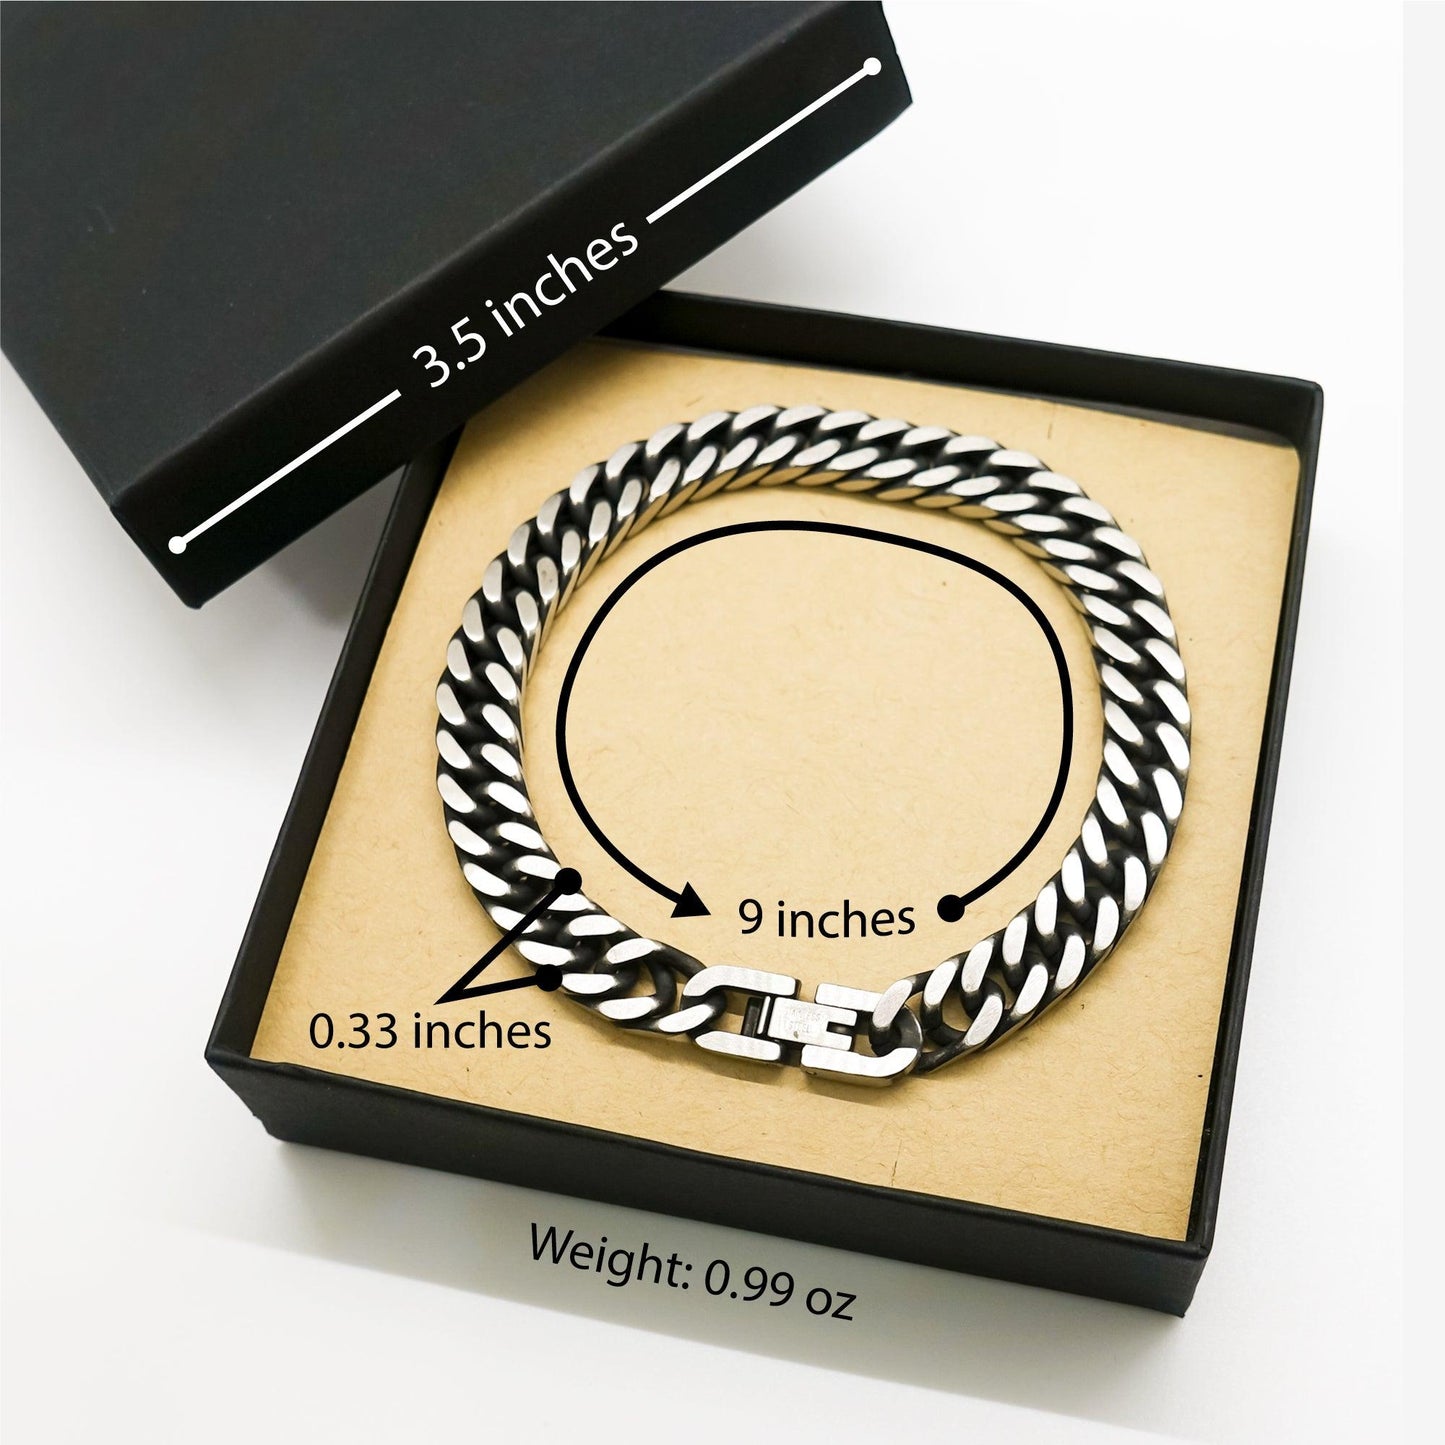 Remarkable Microbiologist Gifts, Your dedication and hard work, Inspirational Birthday Christmas Unique Cuban Link Chain Bracelet For Microbiologist, Coworkers, Men, Women, Friends - Mallard Moon Gift Shop